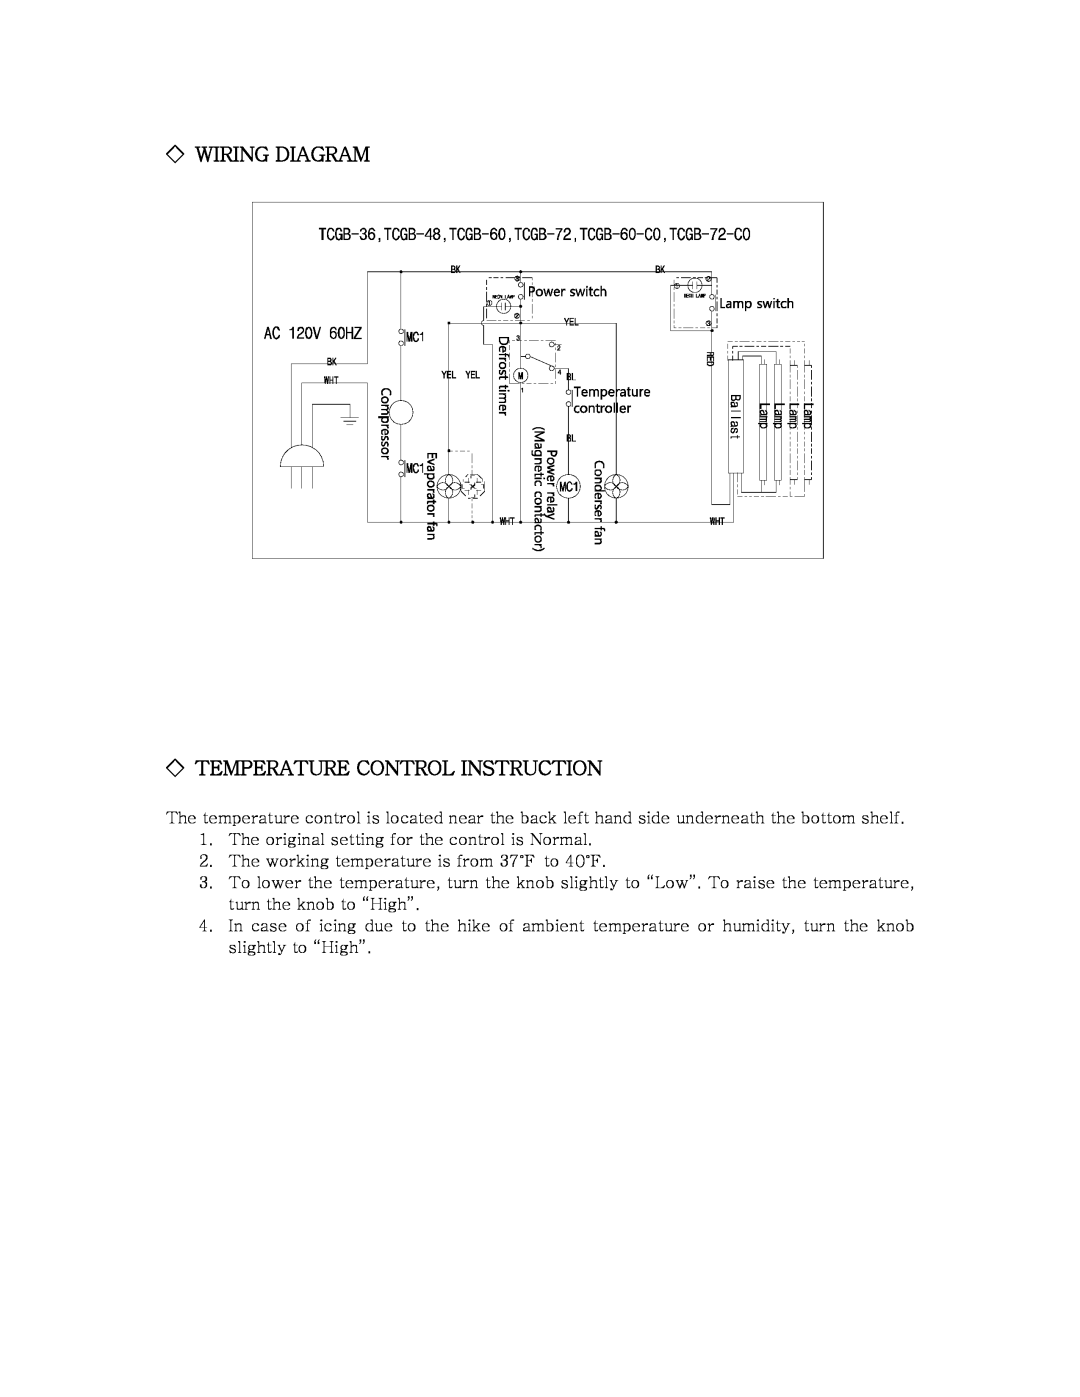 Turbo Air TCGB-60-CO The original setting for the control is Normal, Wiring Diagram Temperature Control Instruction 